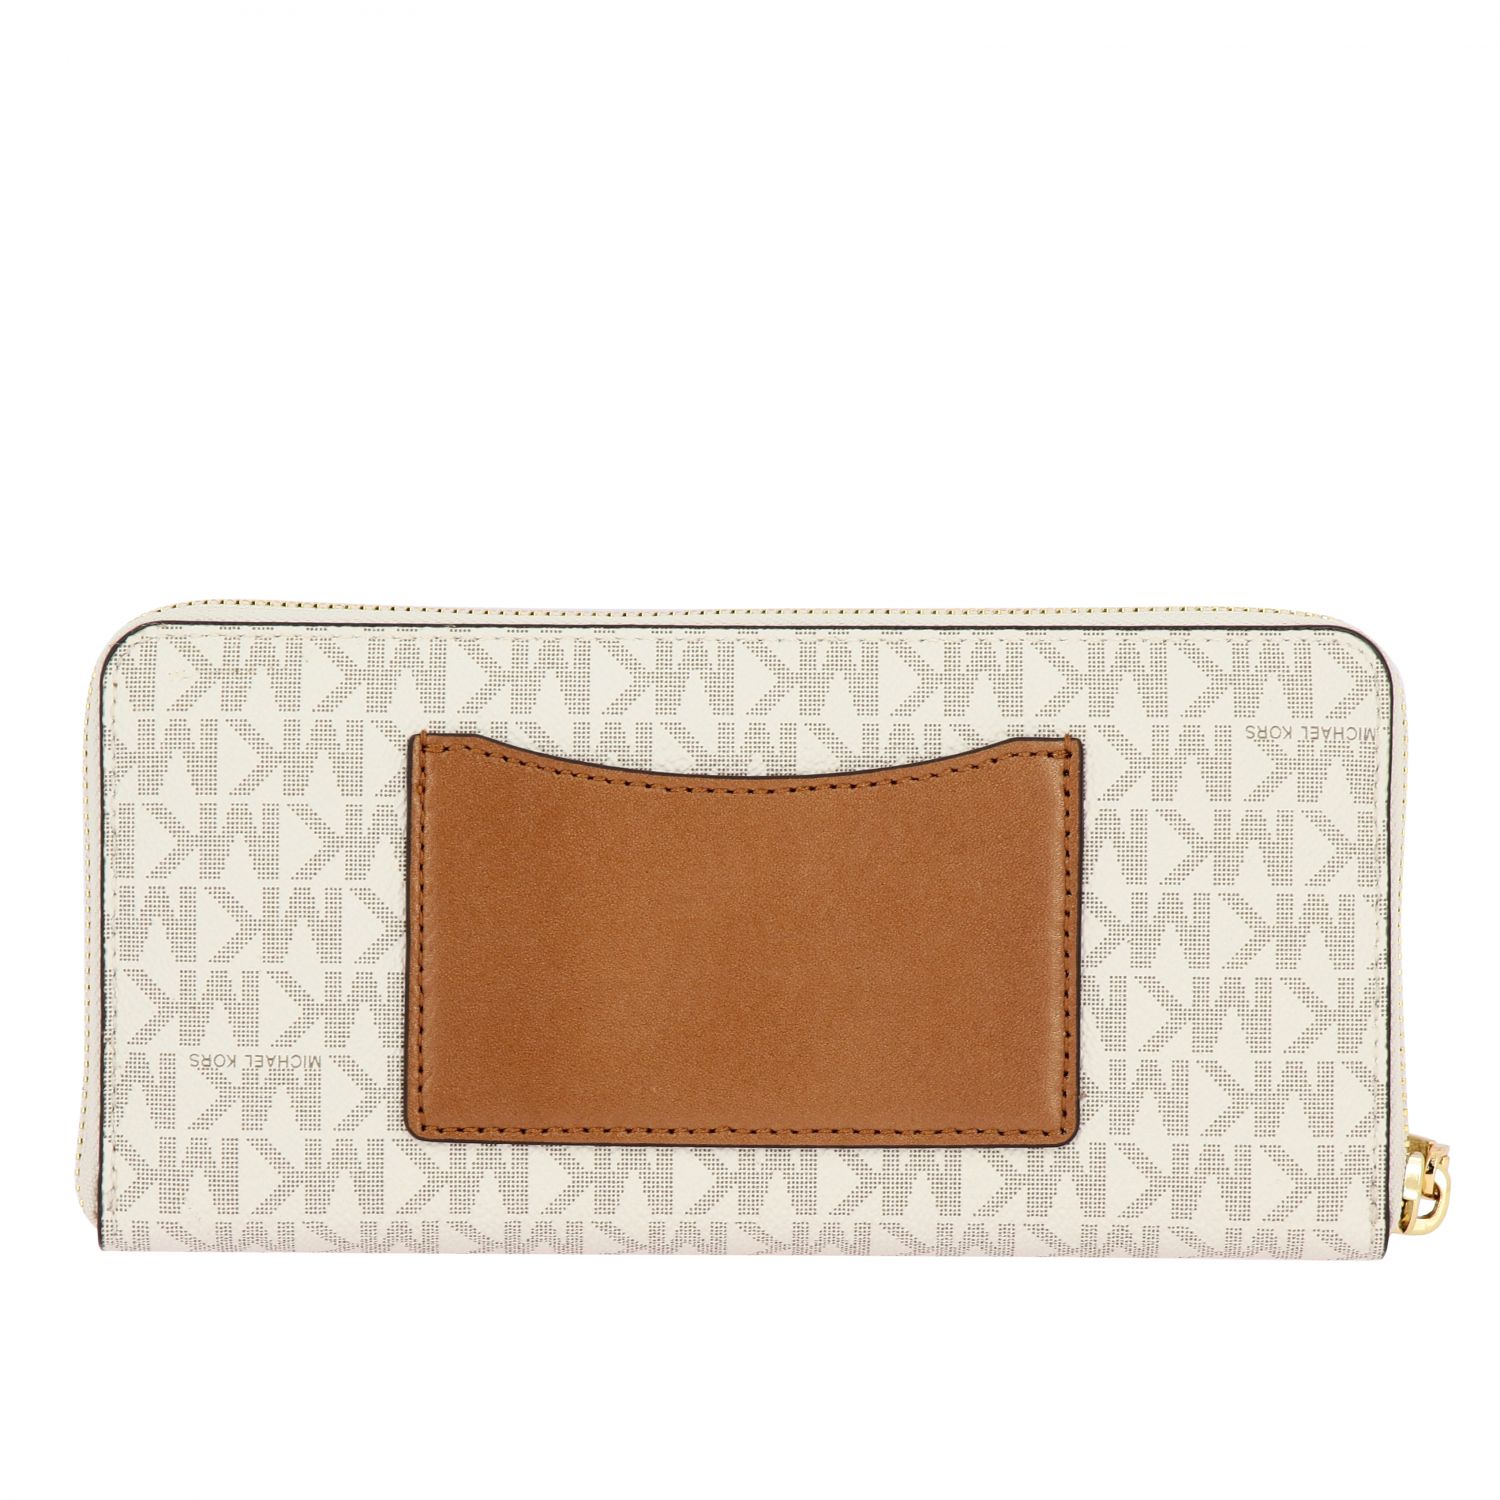 Michael Michael Kors Outlet: wallet with MK all over print | Wallet ...